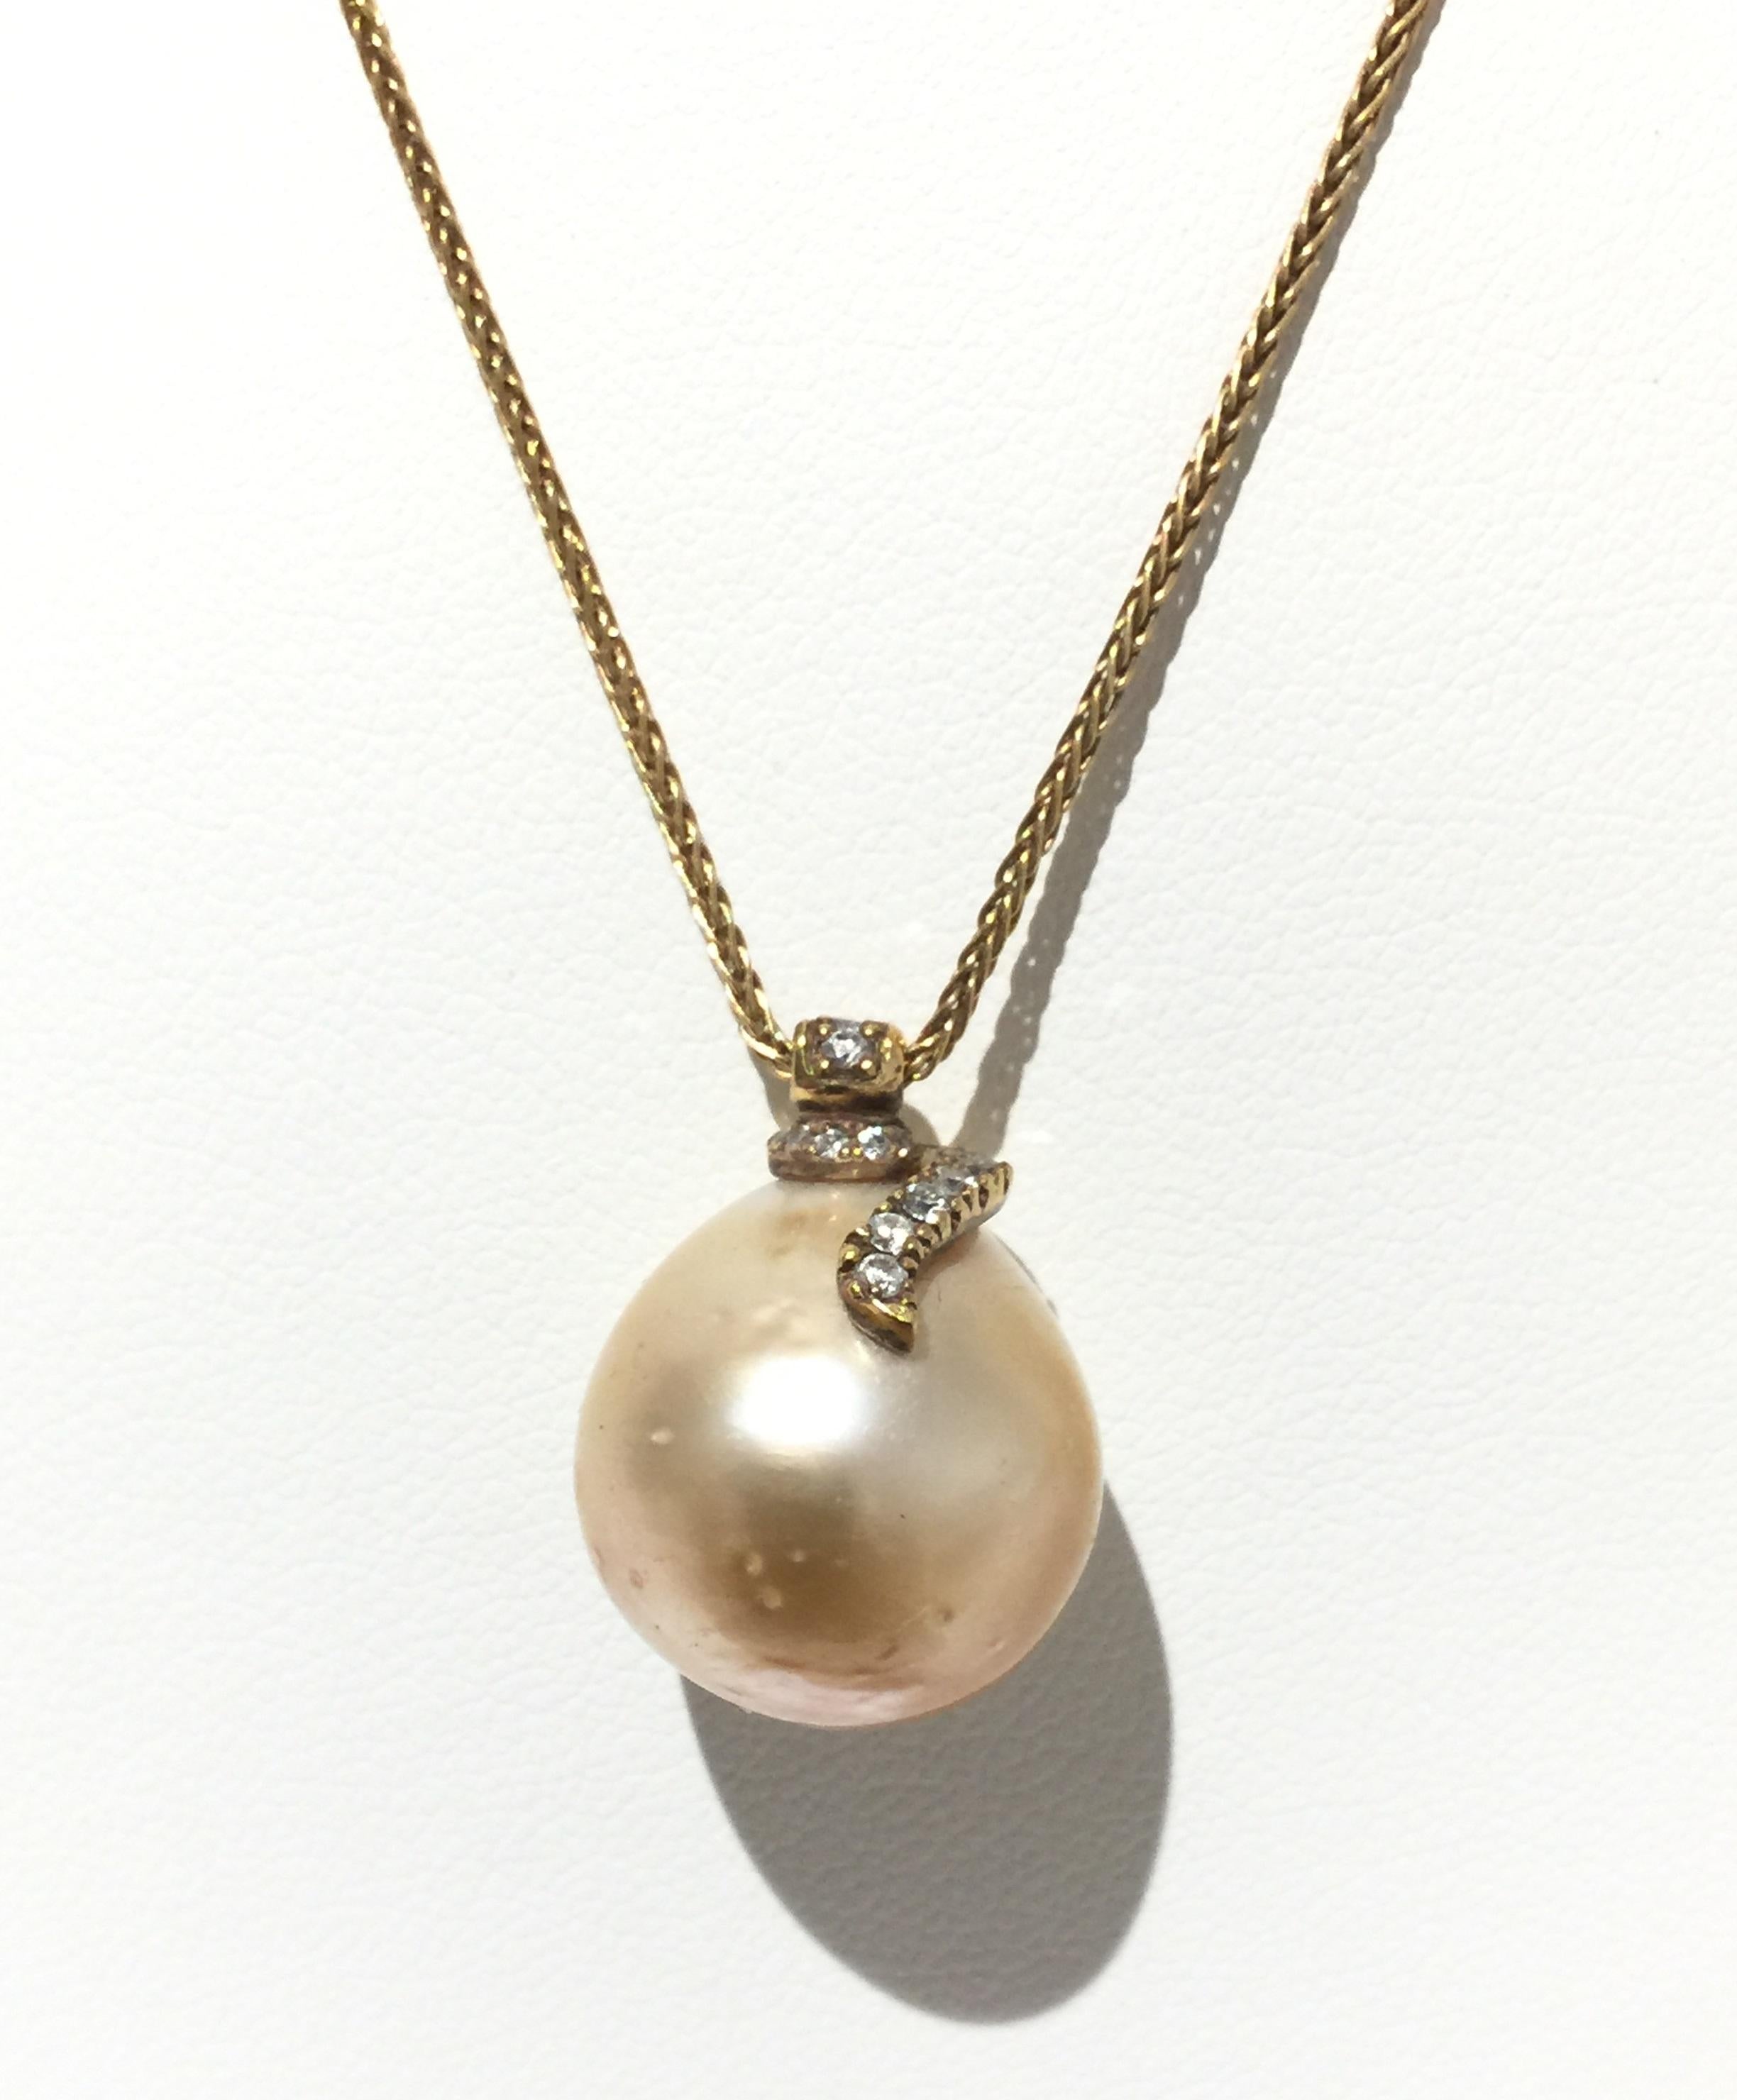 Yvel Pearl and Diamond Necklace.
18k Yellow gold 
Pearl 
Diamonds 0.18ctw
N295GO1Y